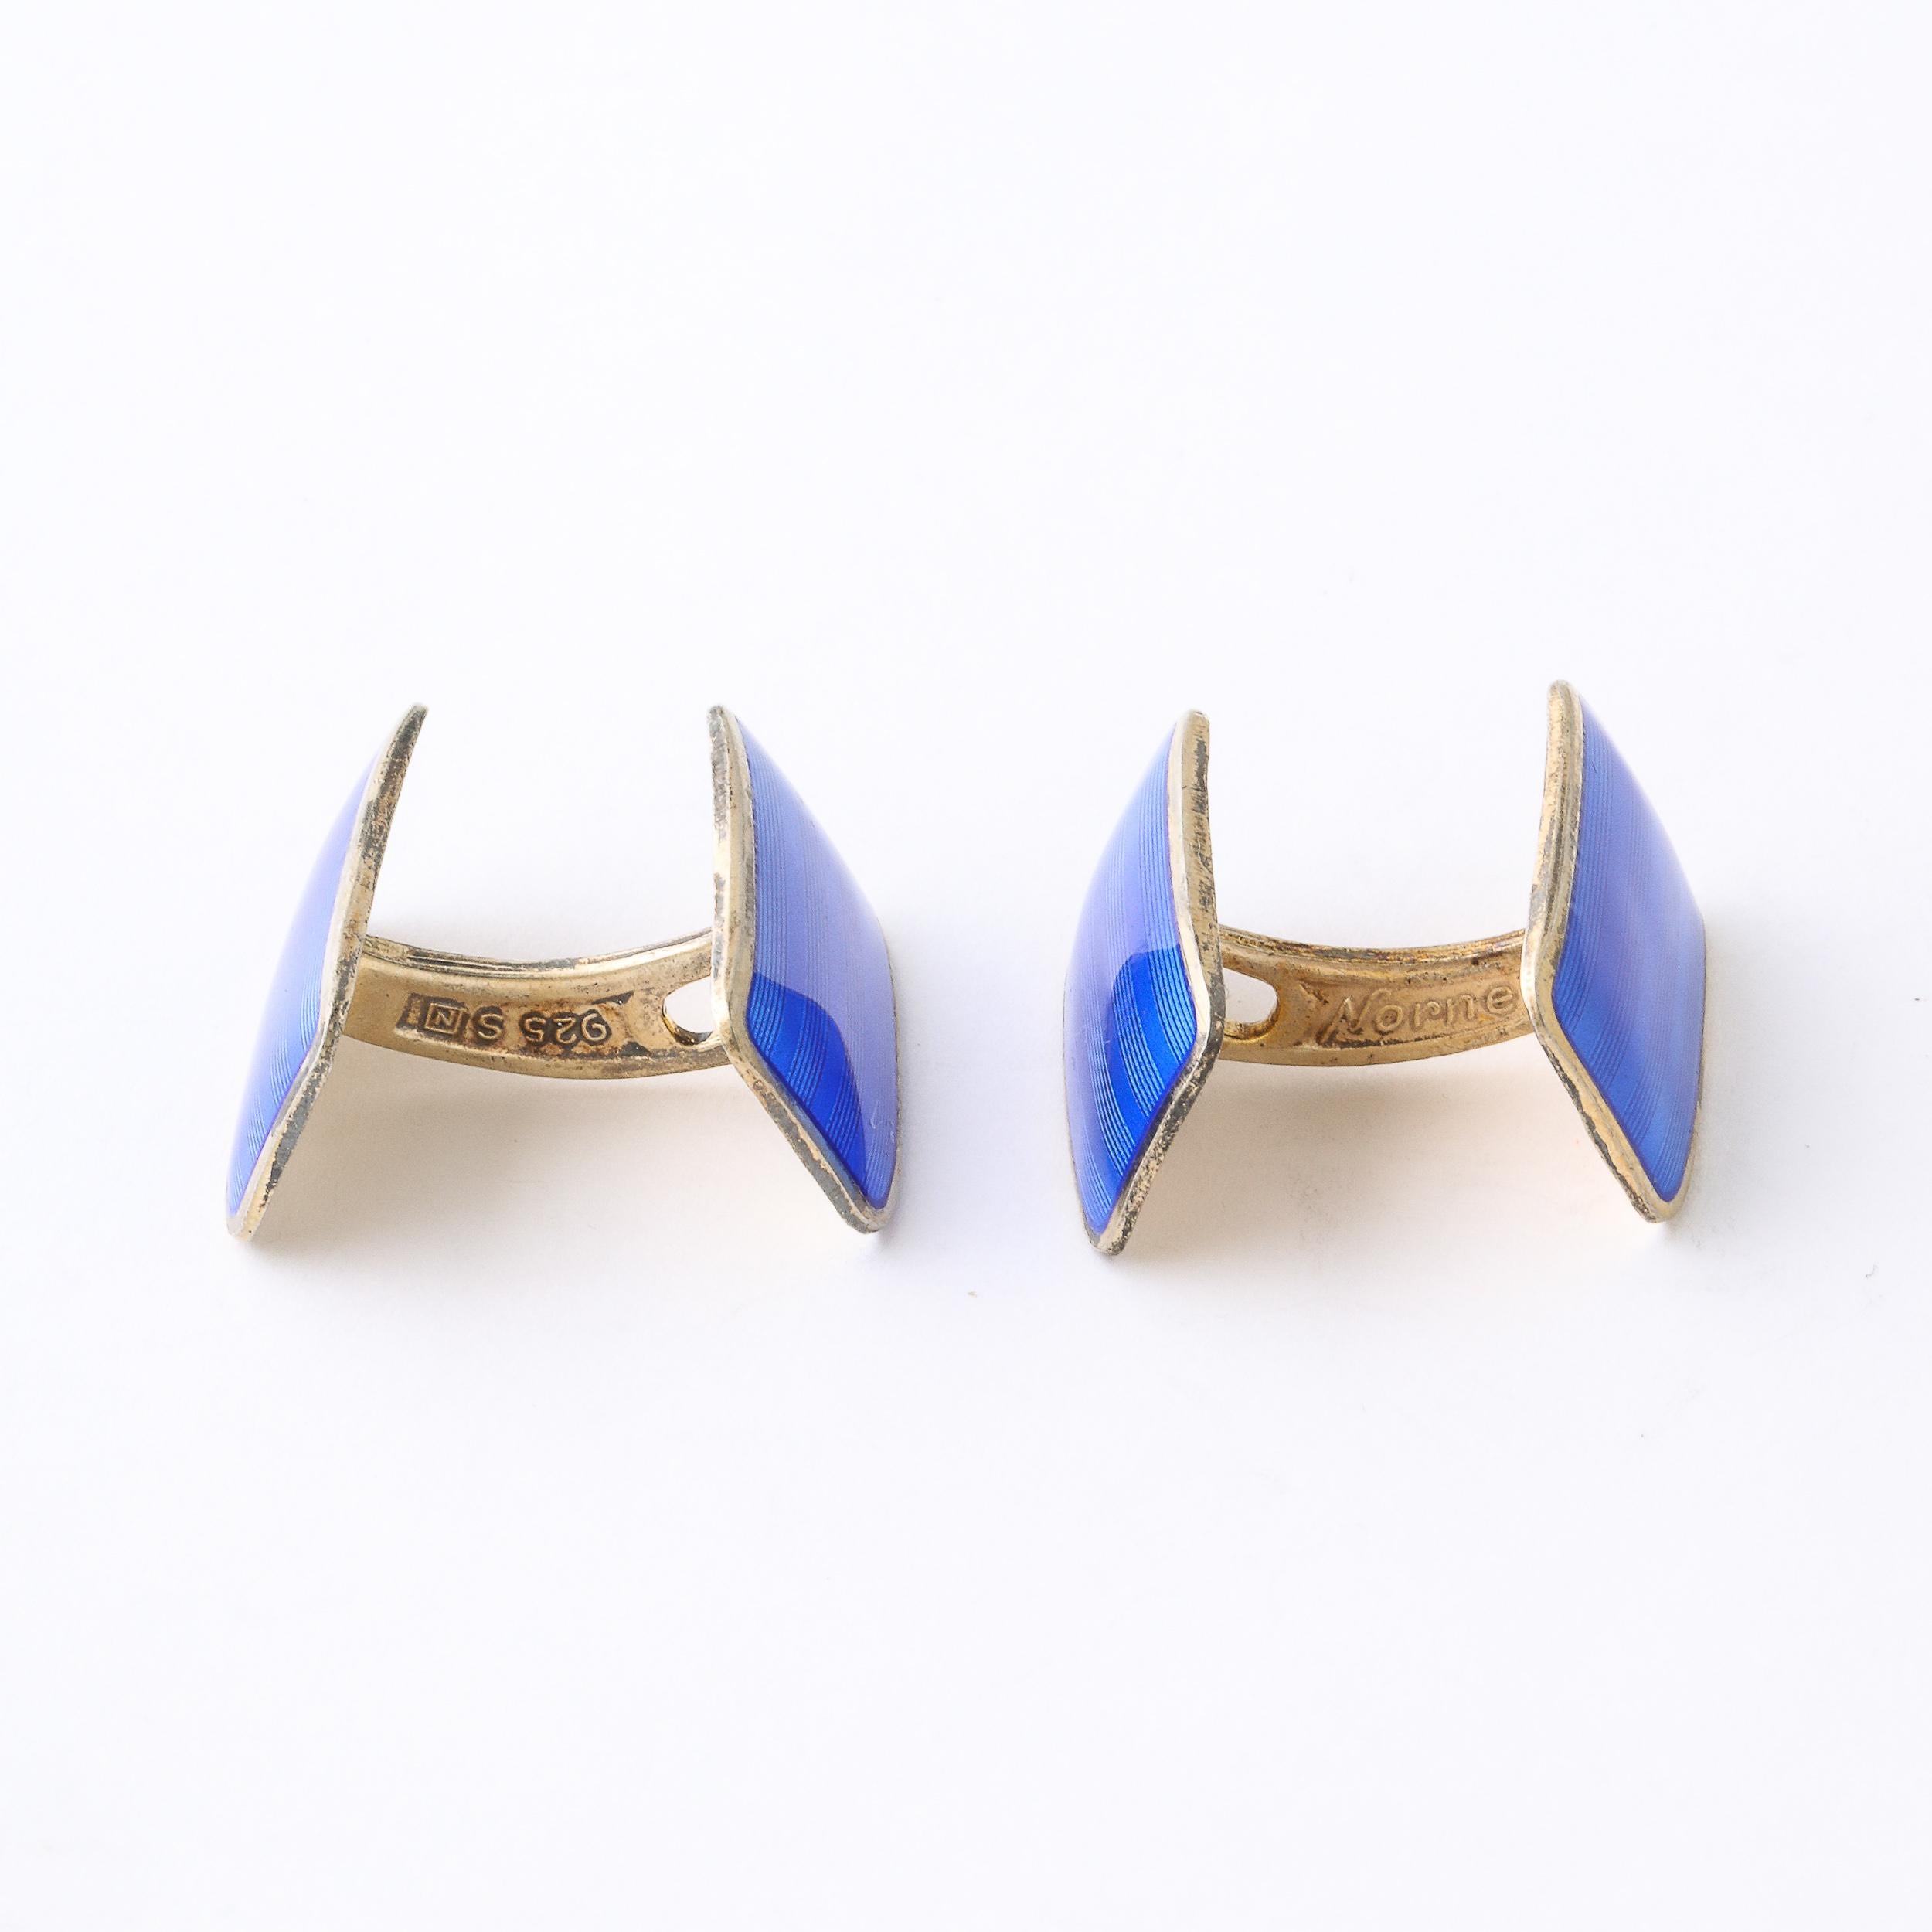 Pair Art Deco Sterling & Guilloche Enamel Cufflinks by Ansel Holmsen of Norway For Sale 1